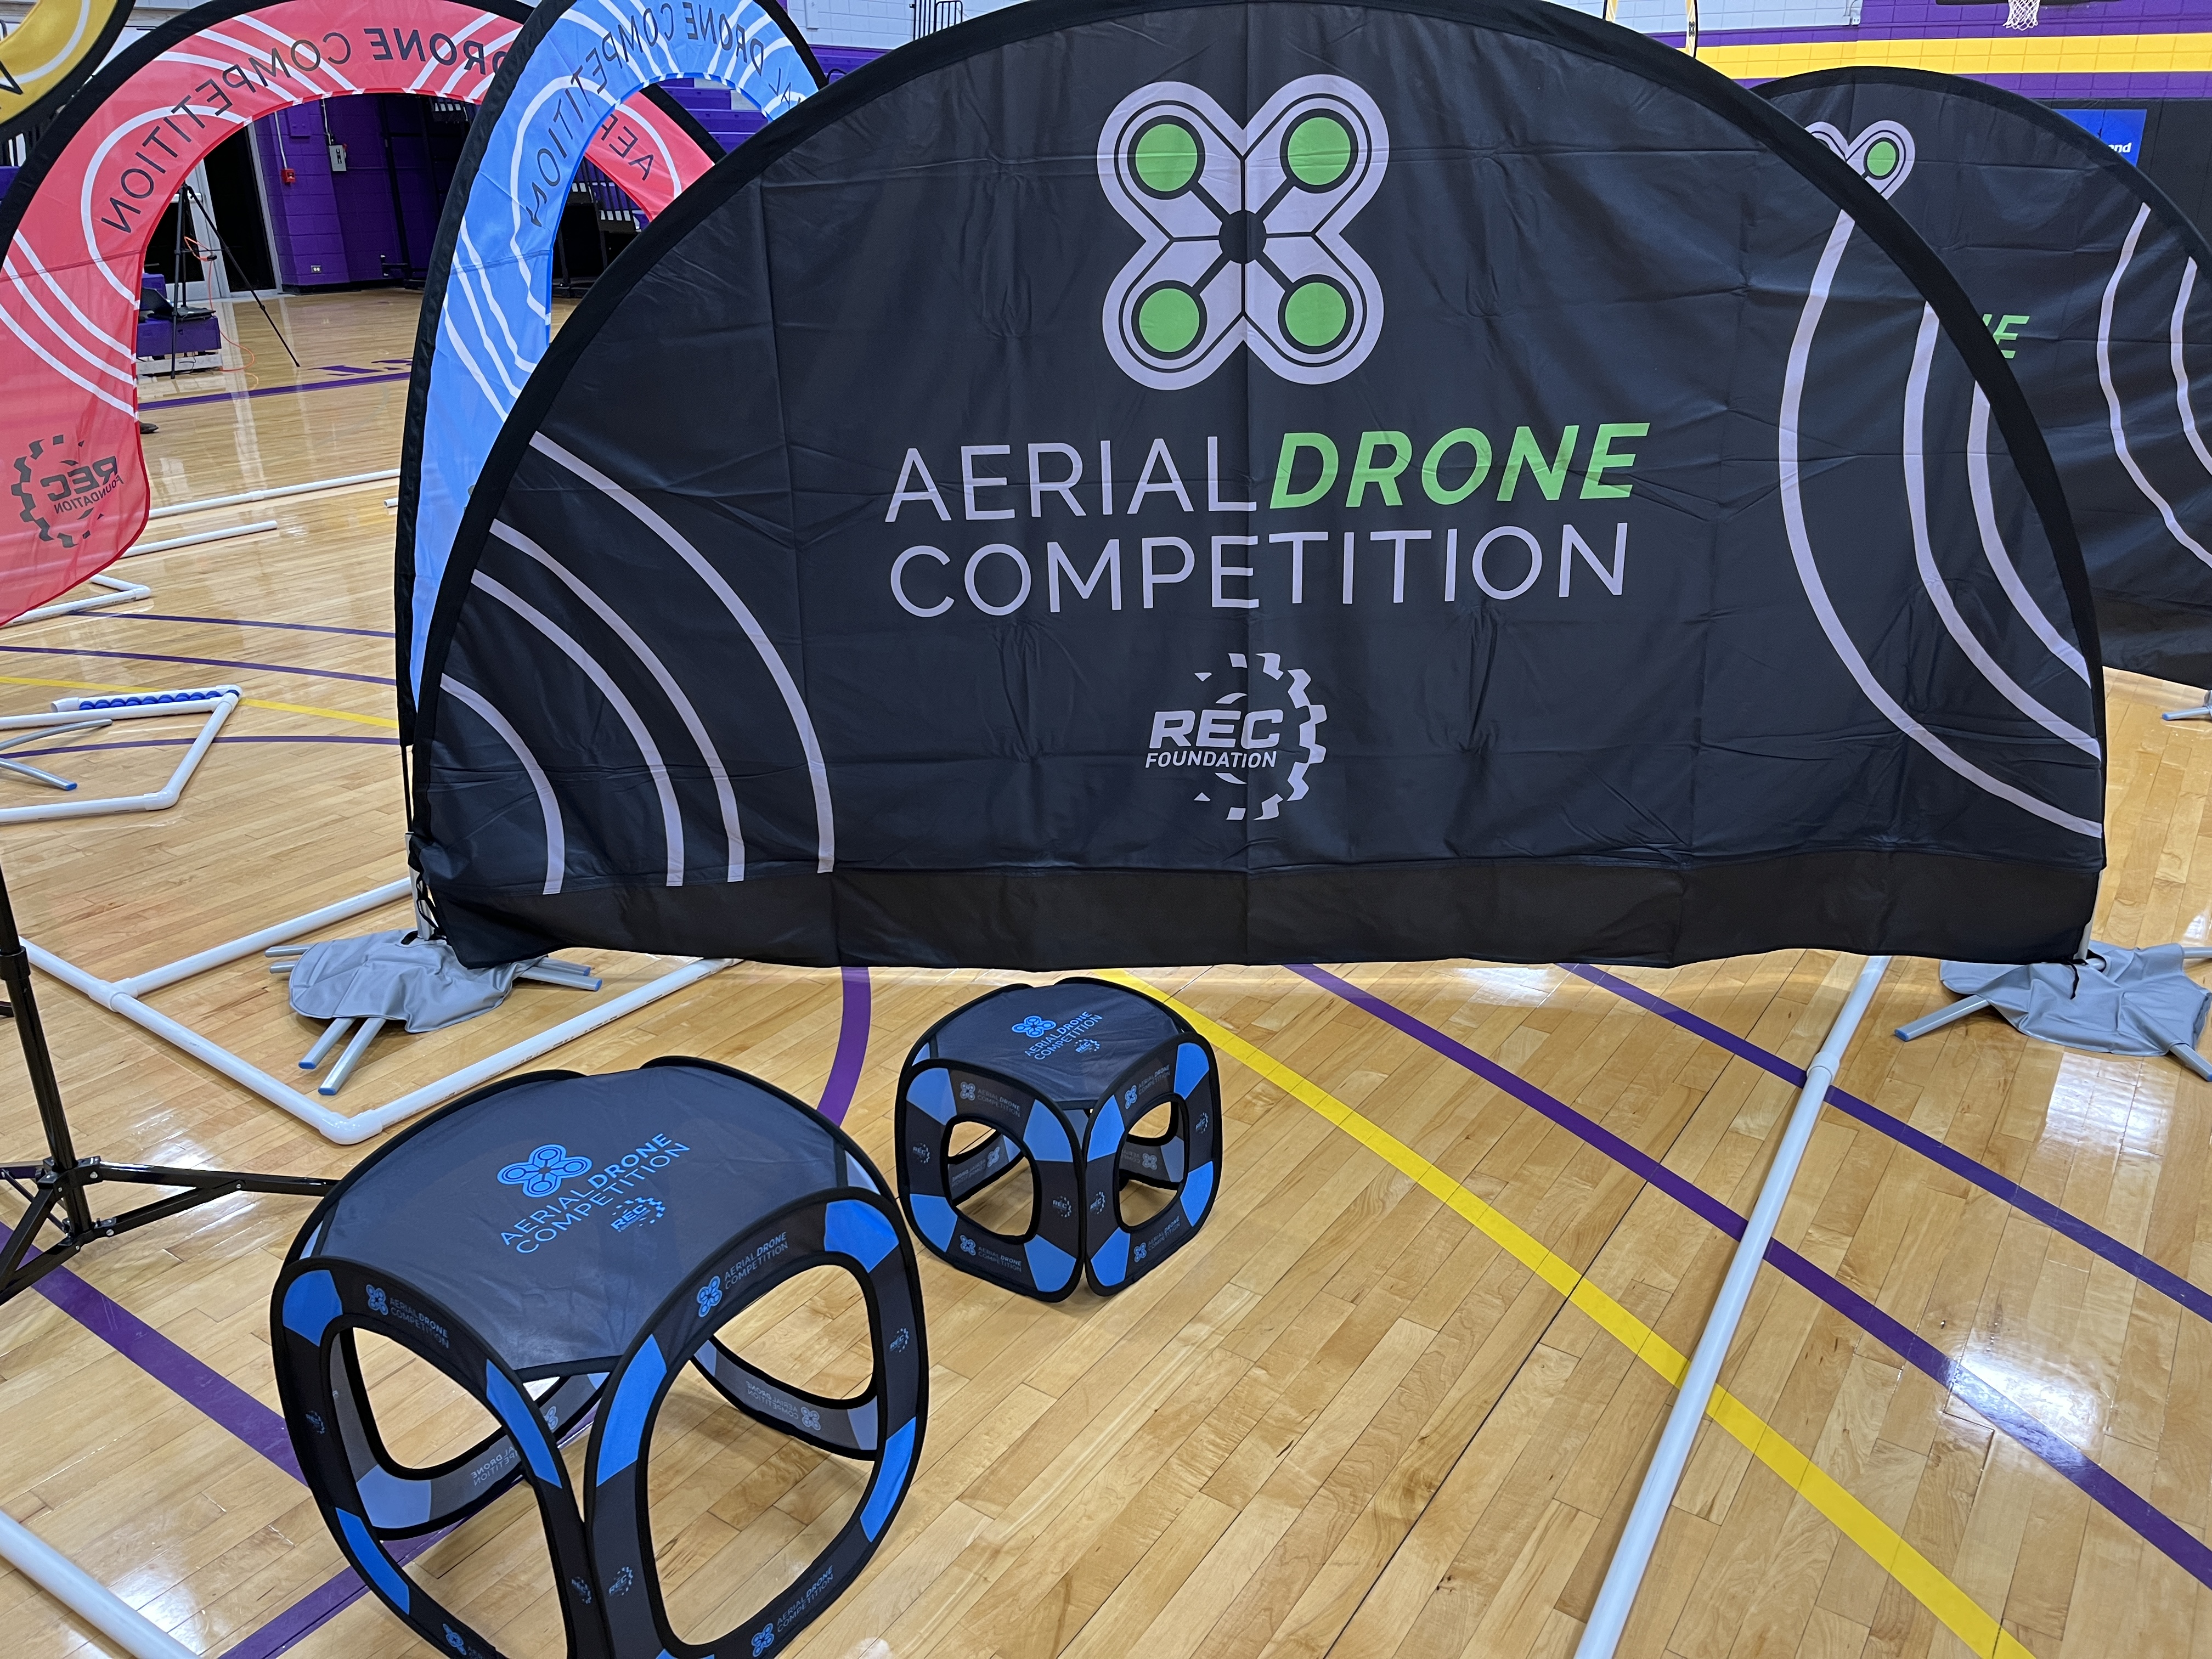 Aerial Drone Competition:Starting a Team Webinar and Q&A - Thursday 12/8 6:00 pm Central Time - Hosted by the REC Foundation